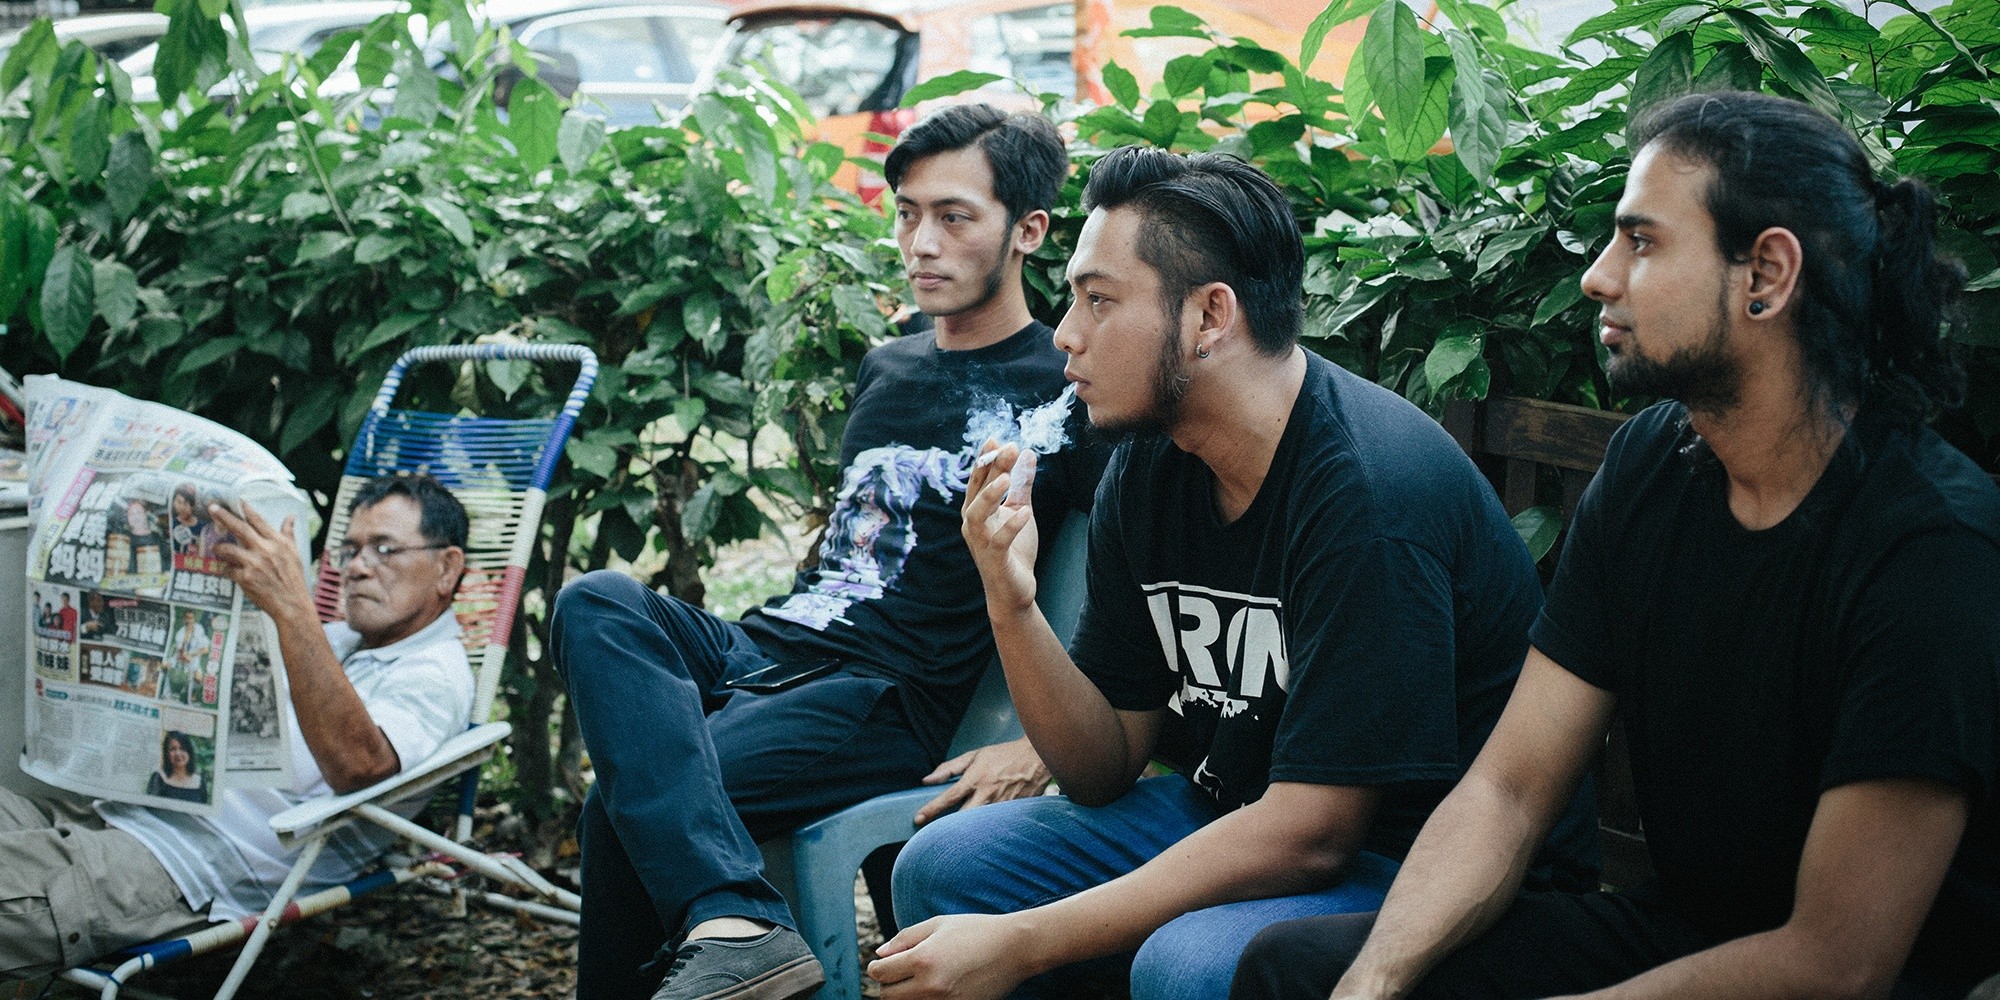 Wormrot are now the first Singapore band to play Glastonbury Festival